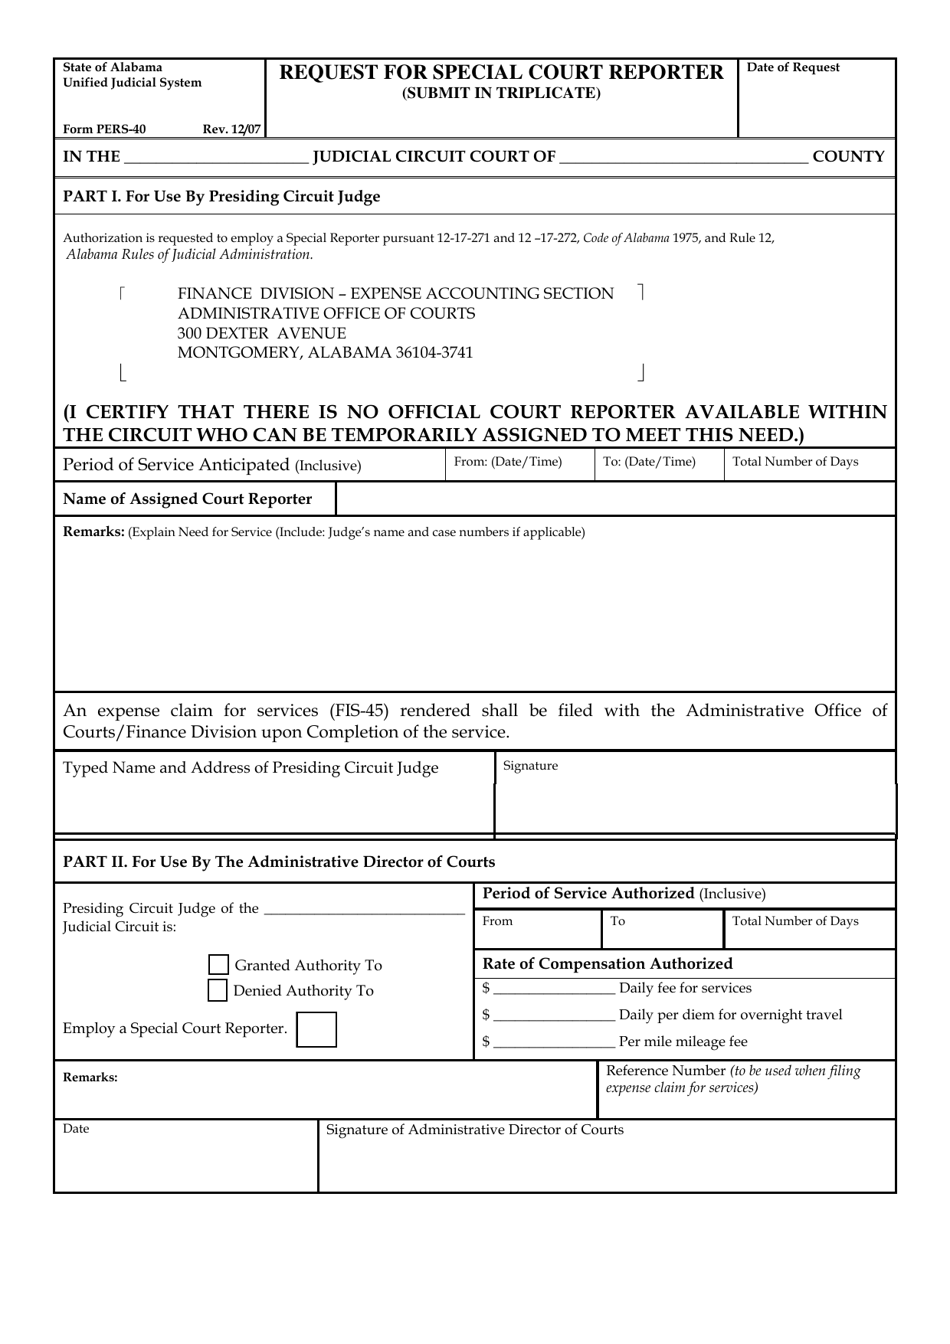 Form PERS-40 Request for Special Court Reporter - Alabama, Page 1